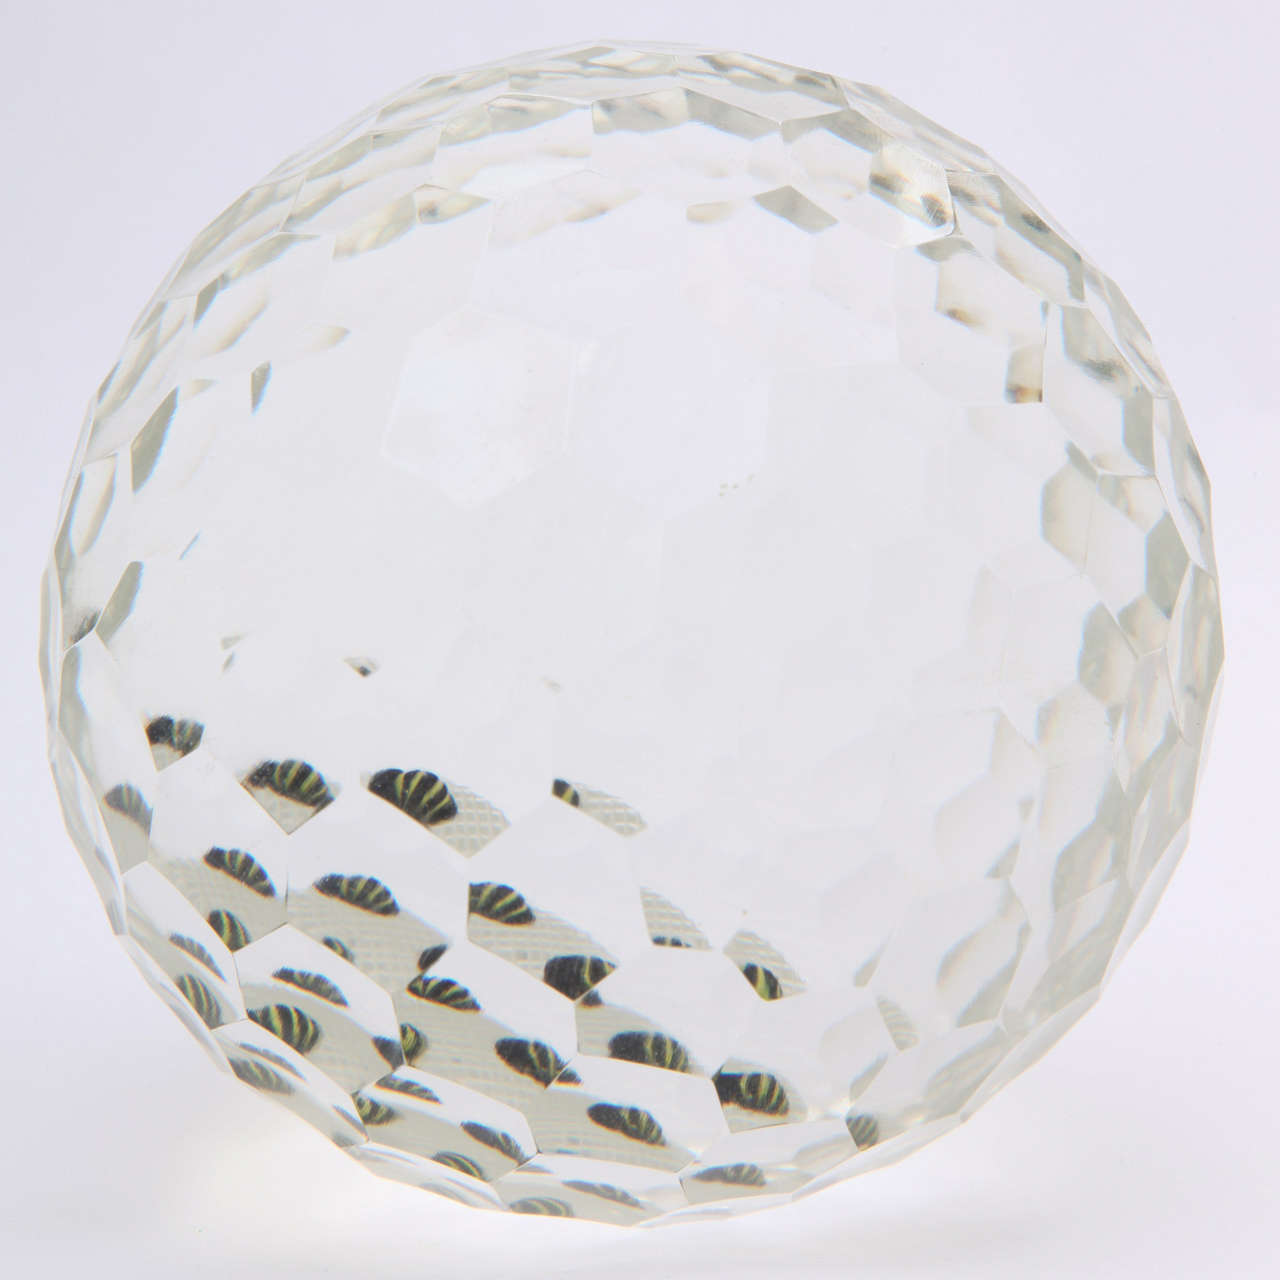 A fine 1981 Perthshire Paperweights Ltd. magnum honeycomb faceted bee paperweight, with four bees in a large faceted paperweight with grid cut base